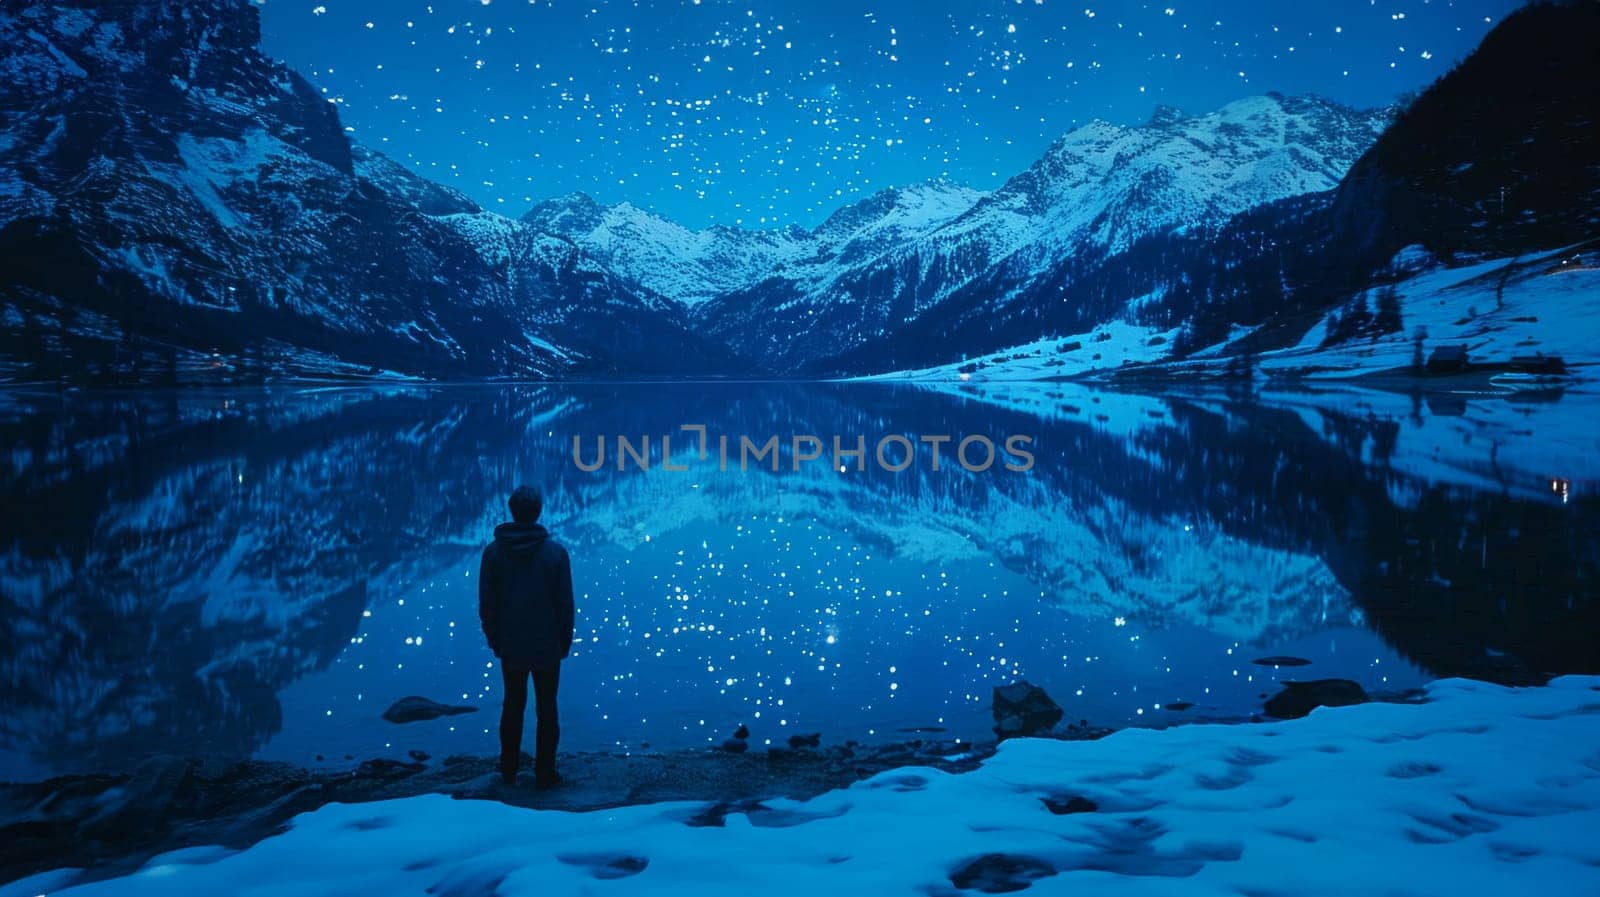 A silhouette of a person standing still in front of a calm lake under the starlit night sky, surrounded by peaceful reflections and a sense of serenity by but_photo